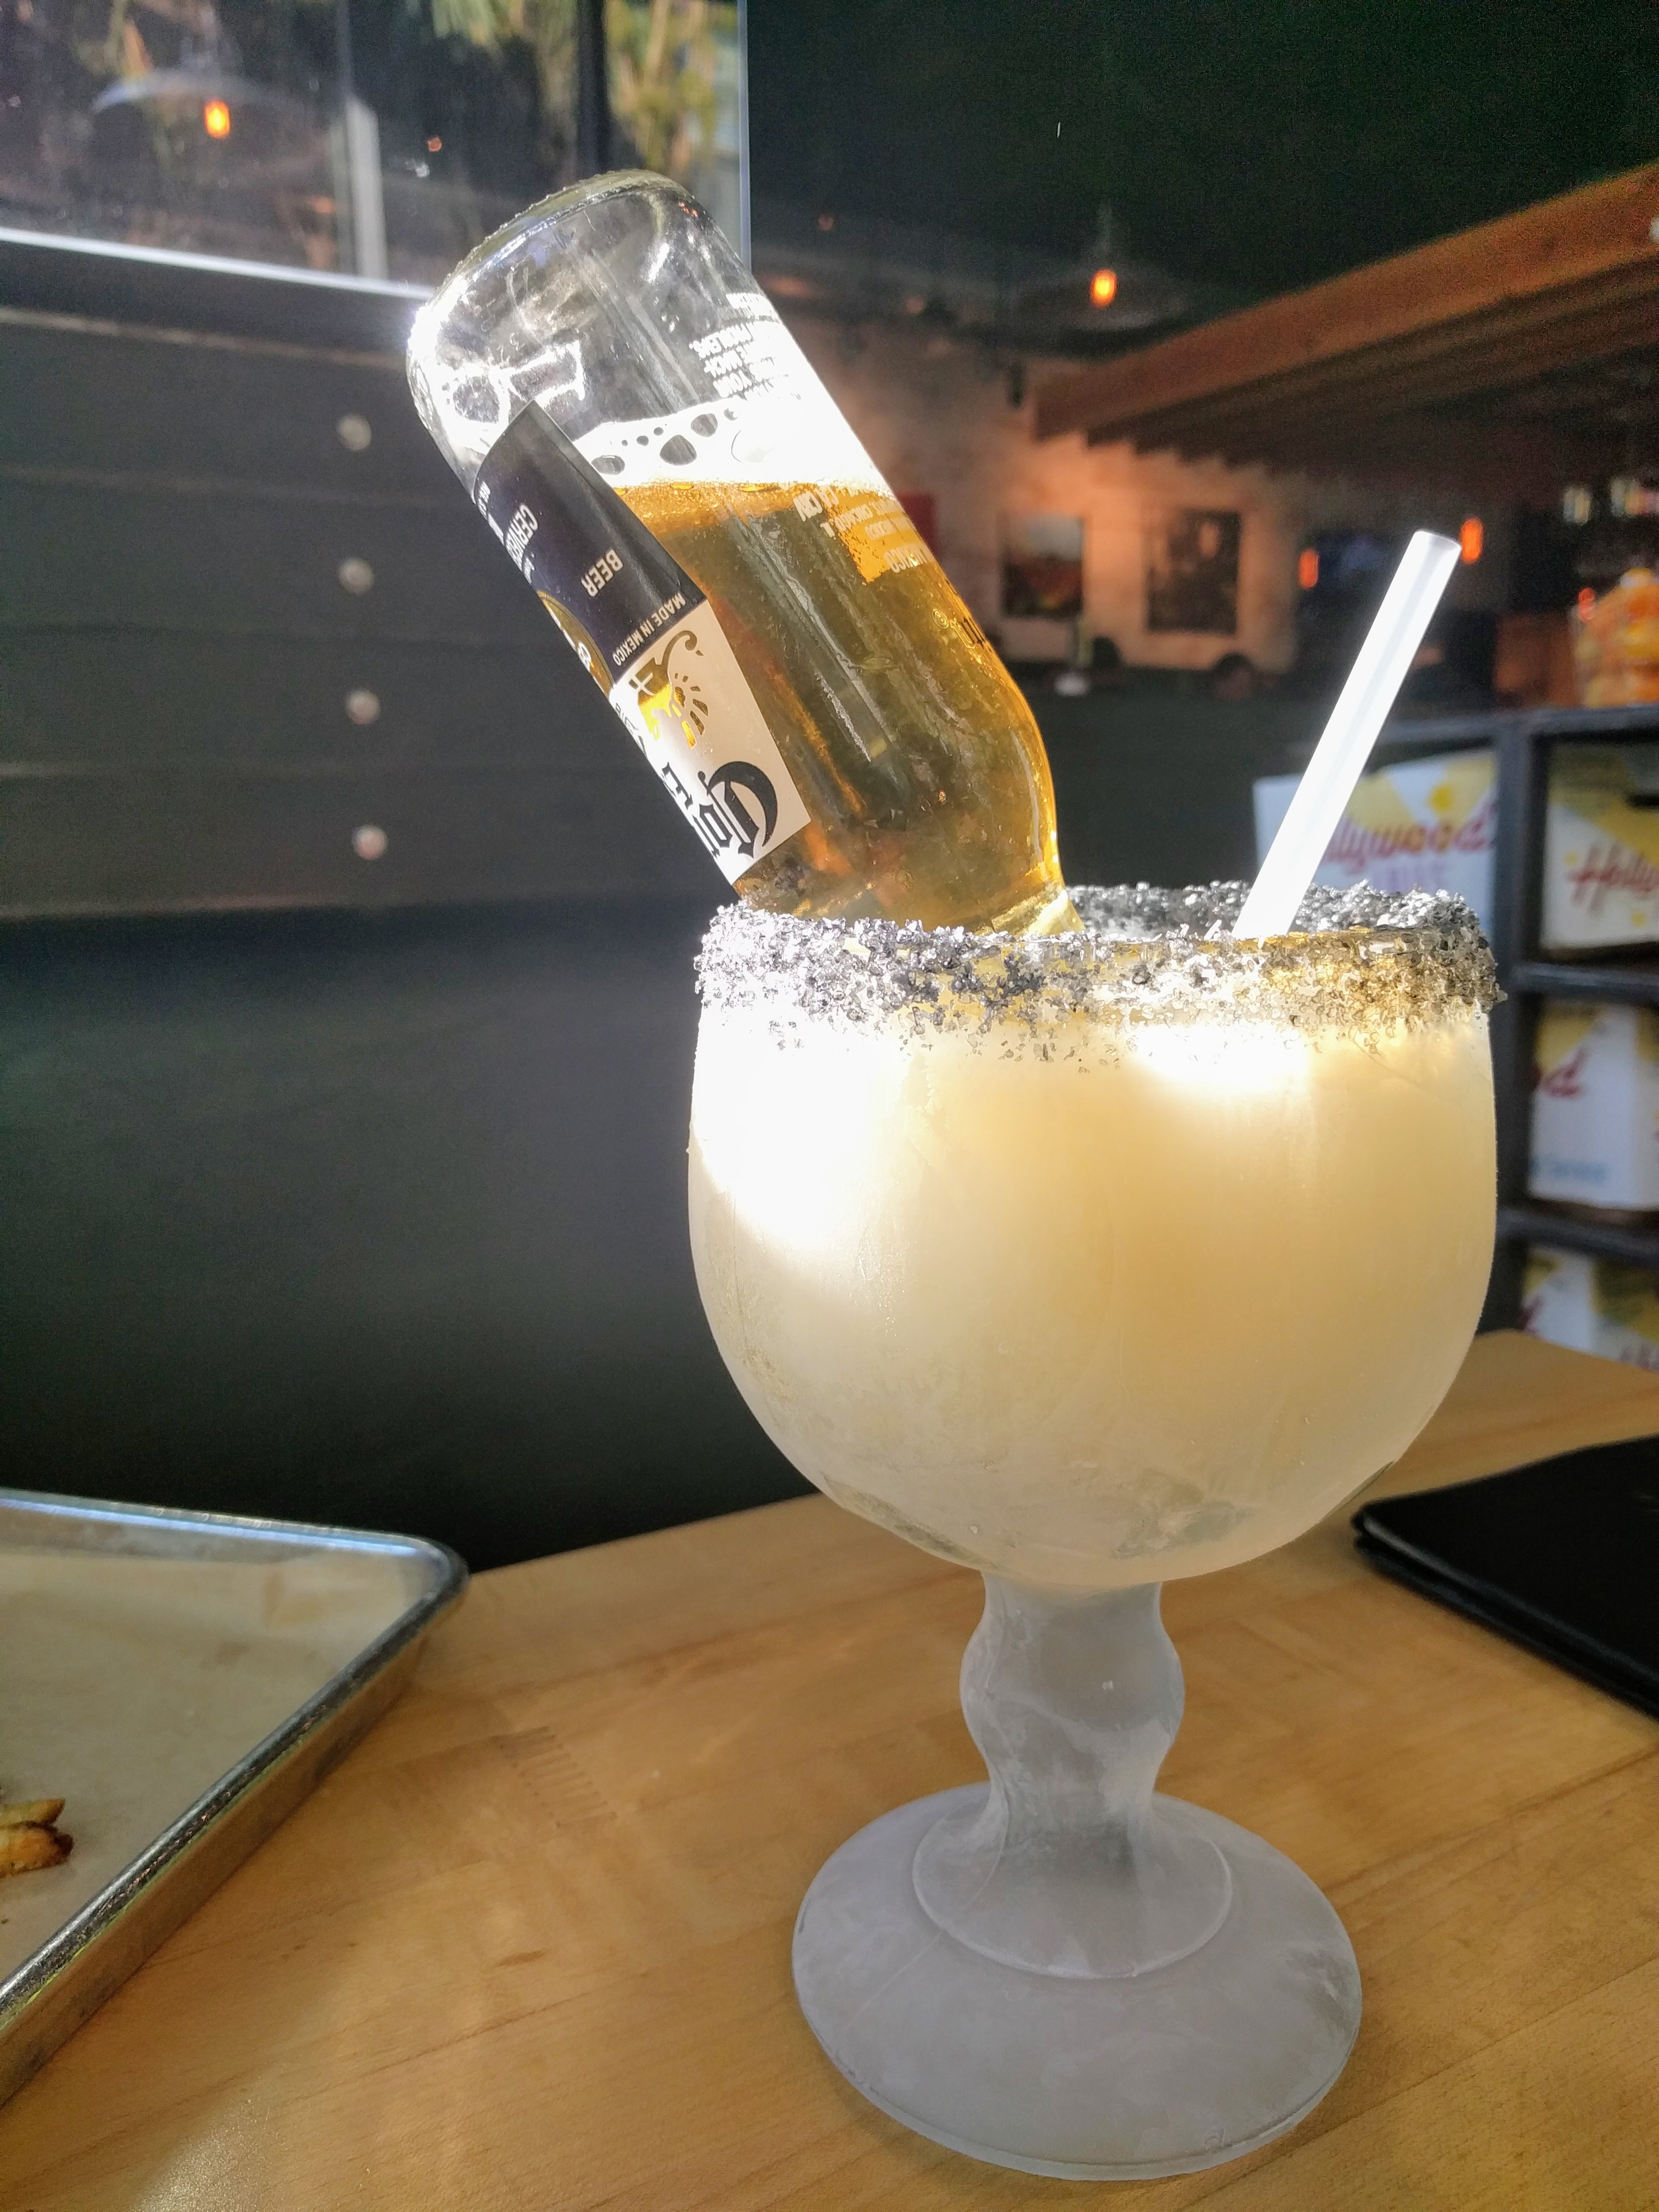 A Corona beer bottle turned upside down into a frosty goblet of margarita